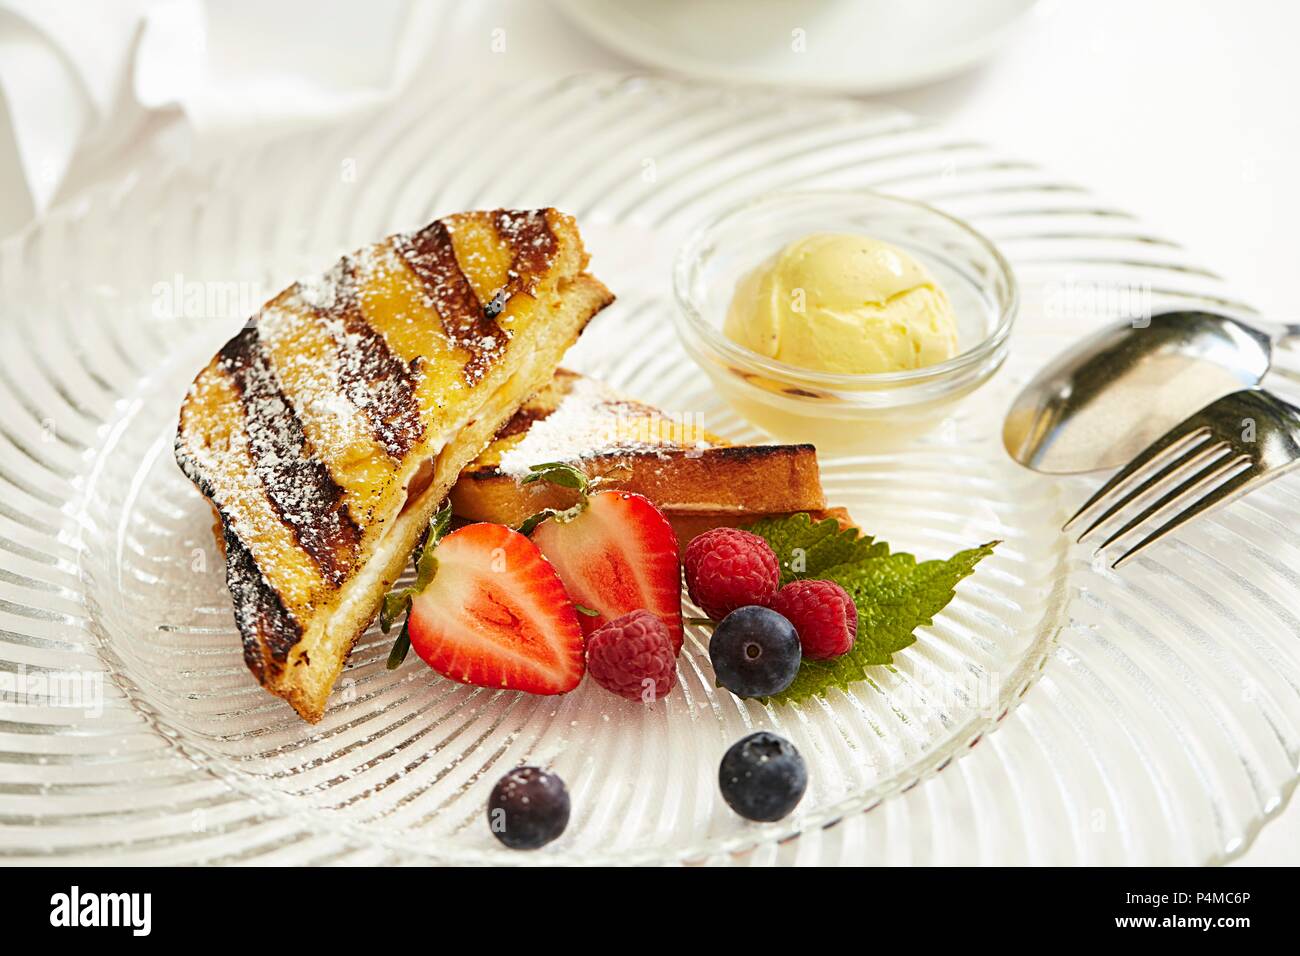 Grilled French toast with fruit and vanilla ice cream Stock Photo